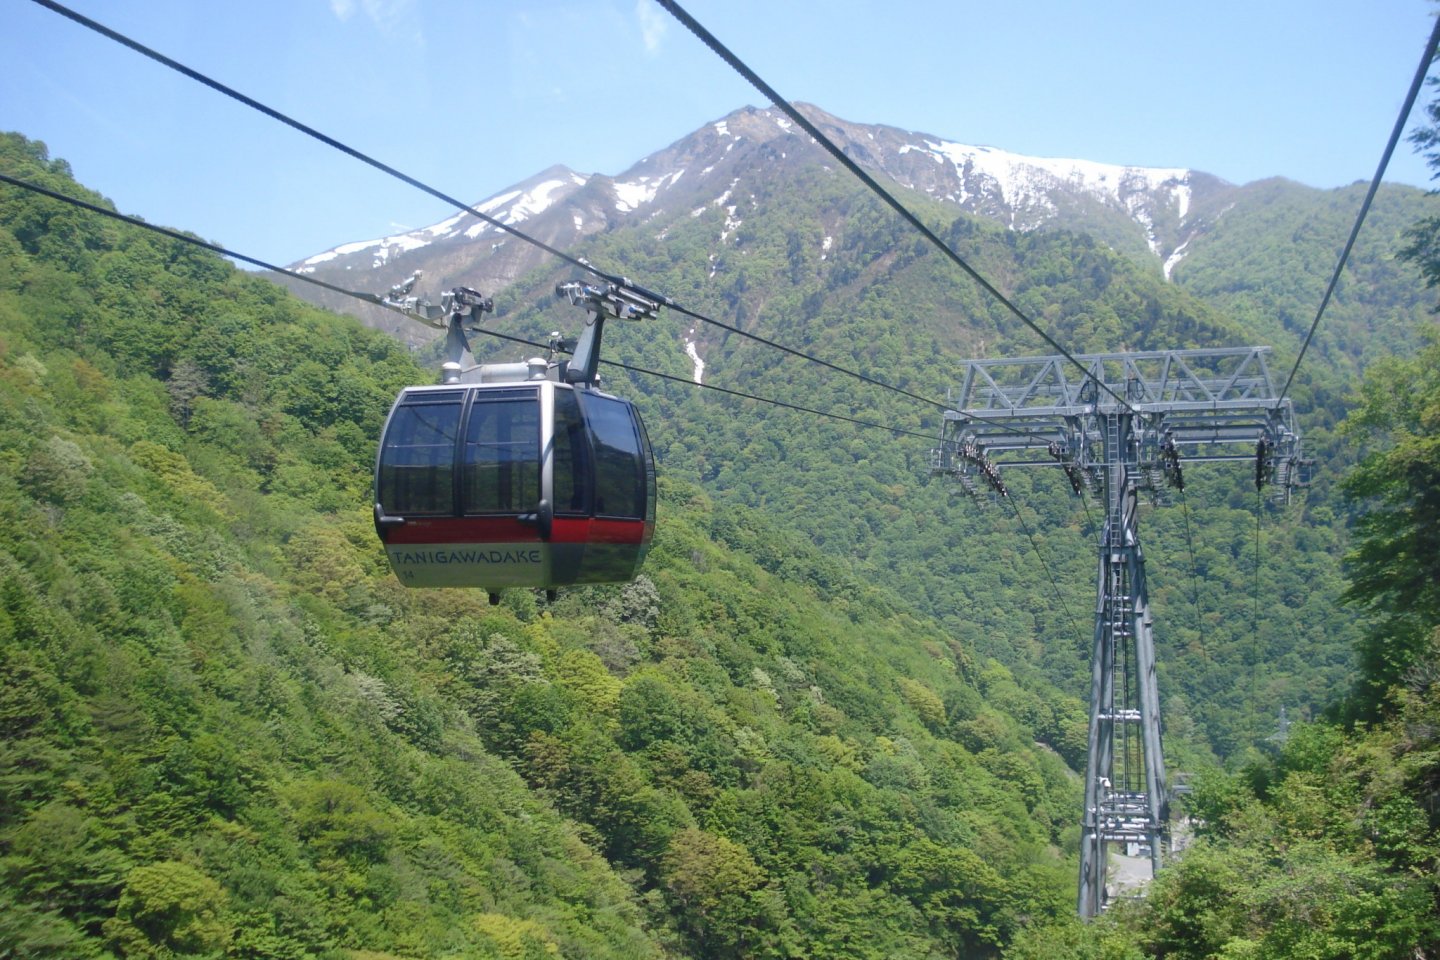 The ropeway that takes you up to the top station